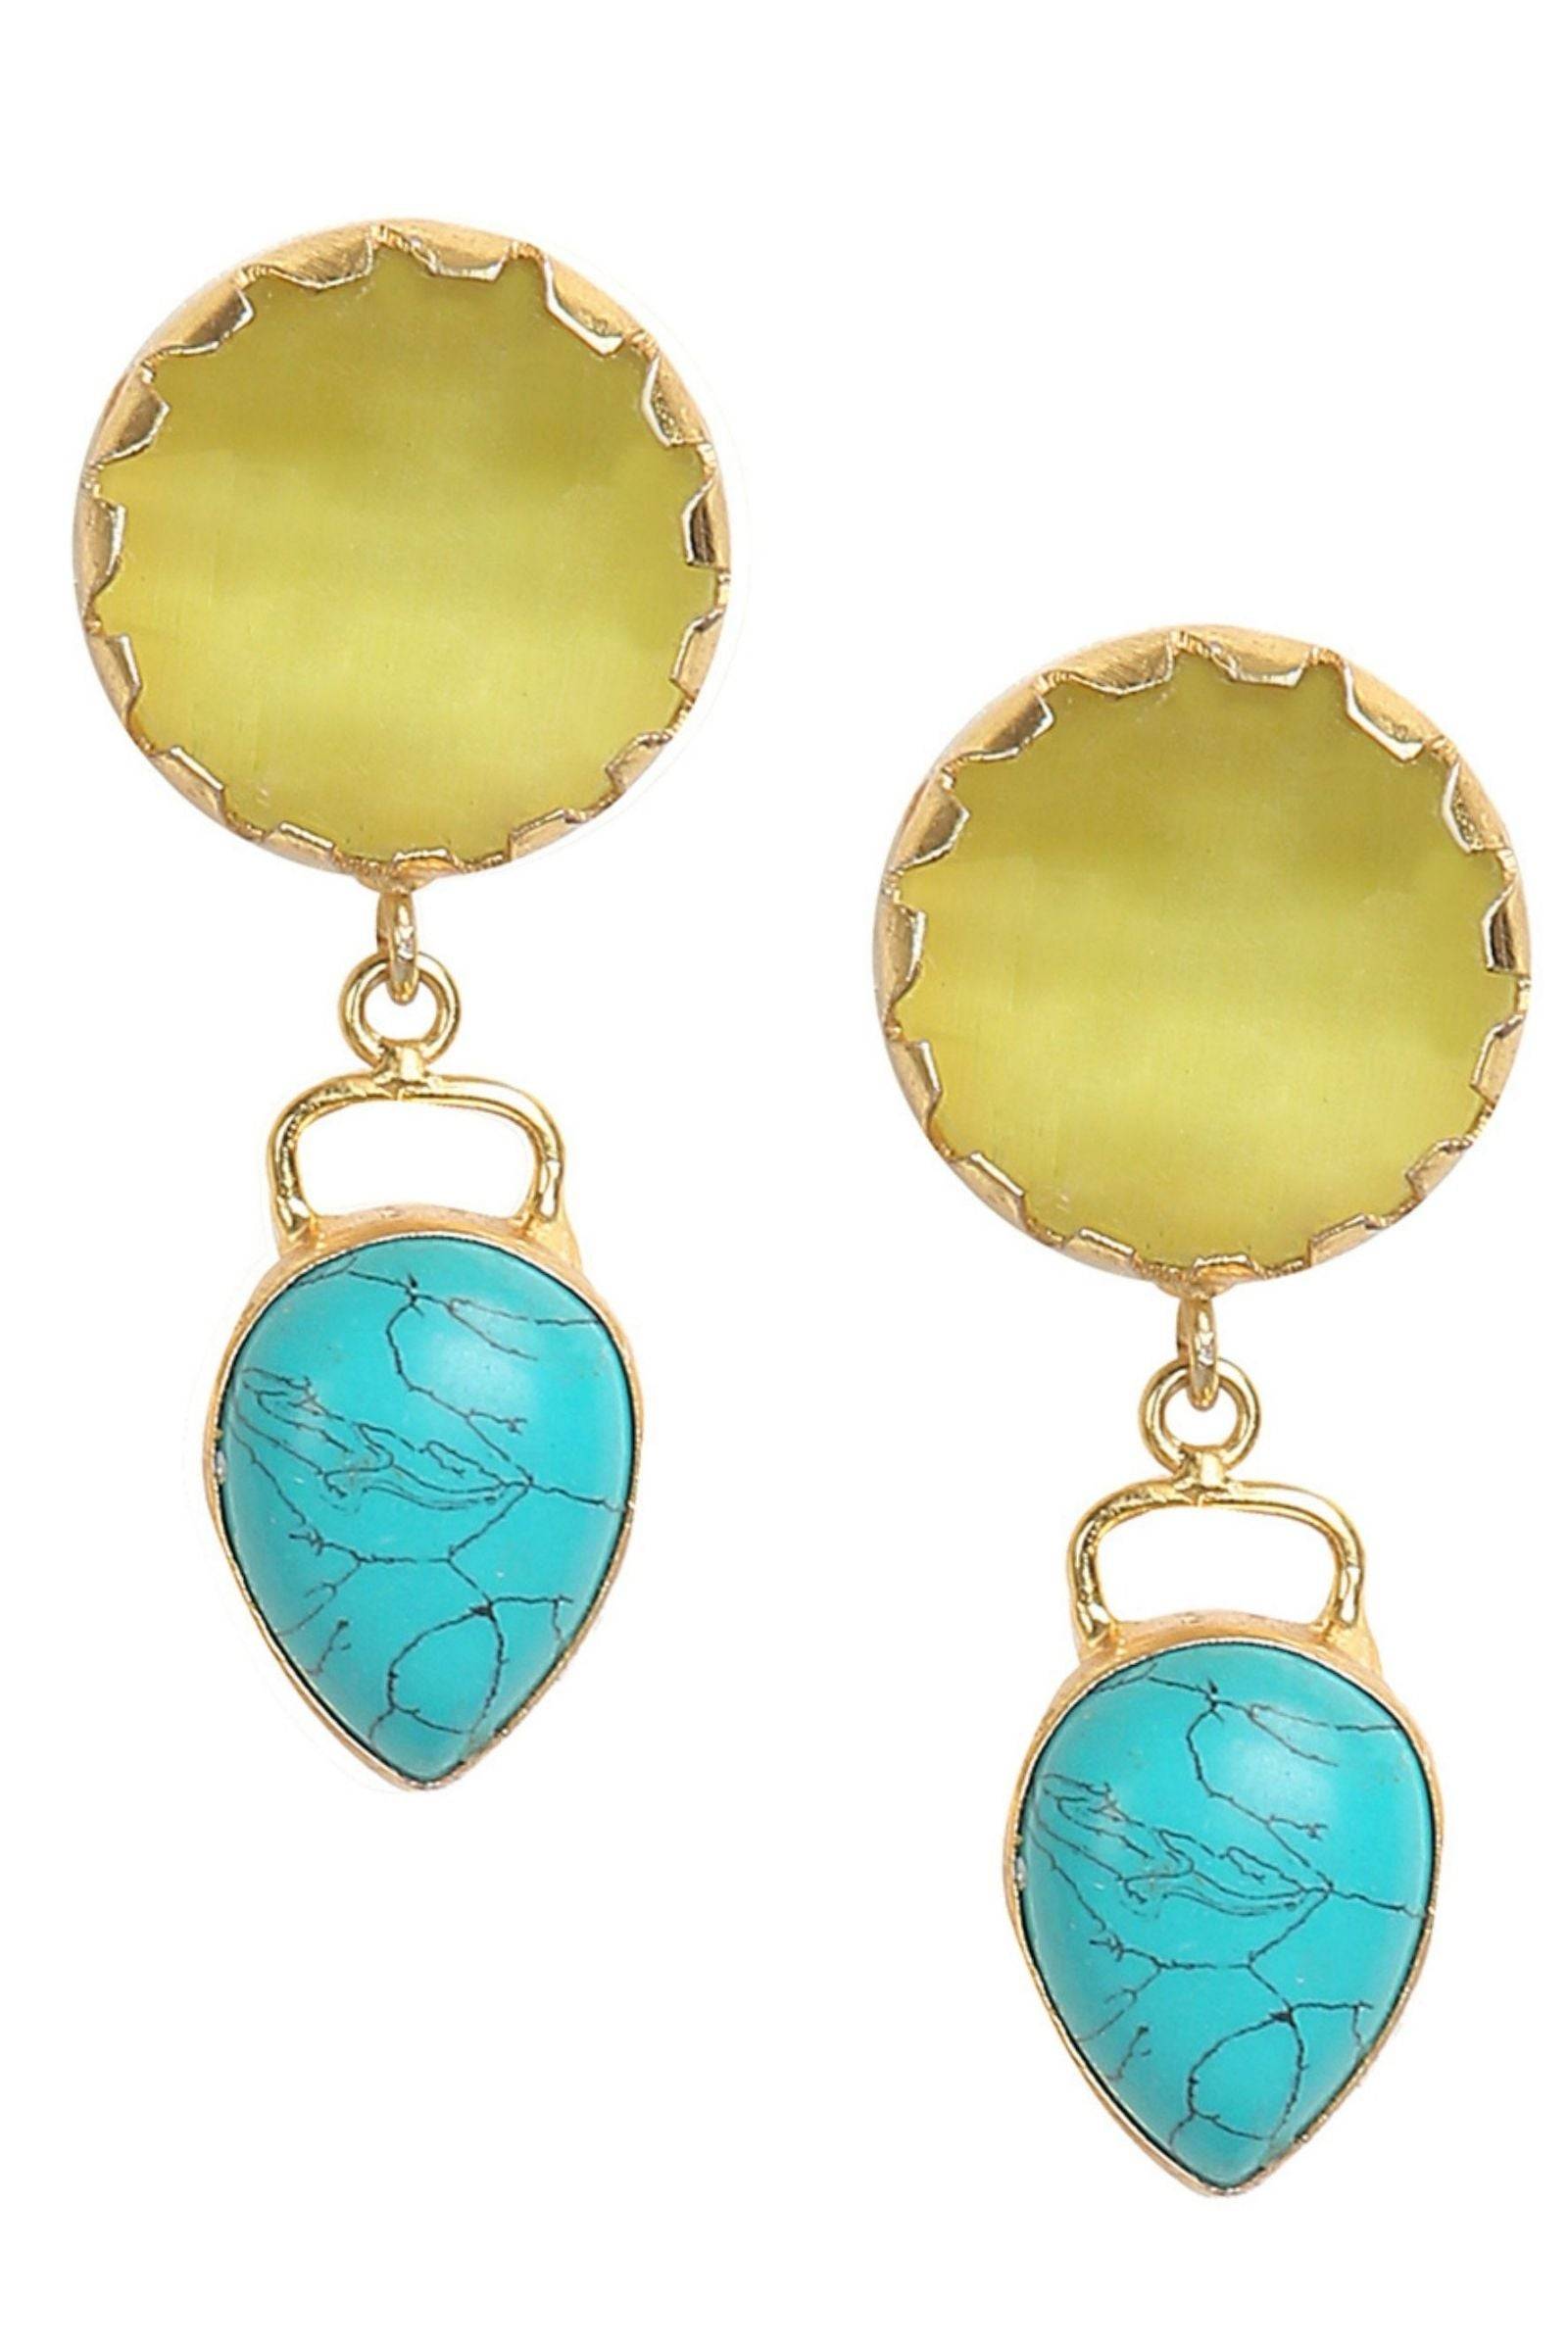 The Statement Collection- Turquoise Statement Earrings